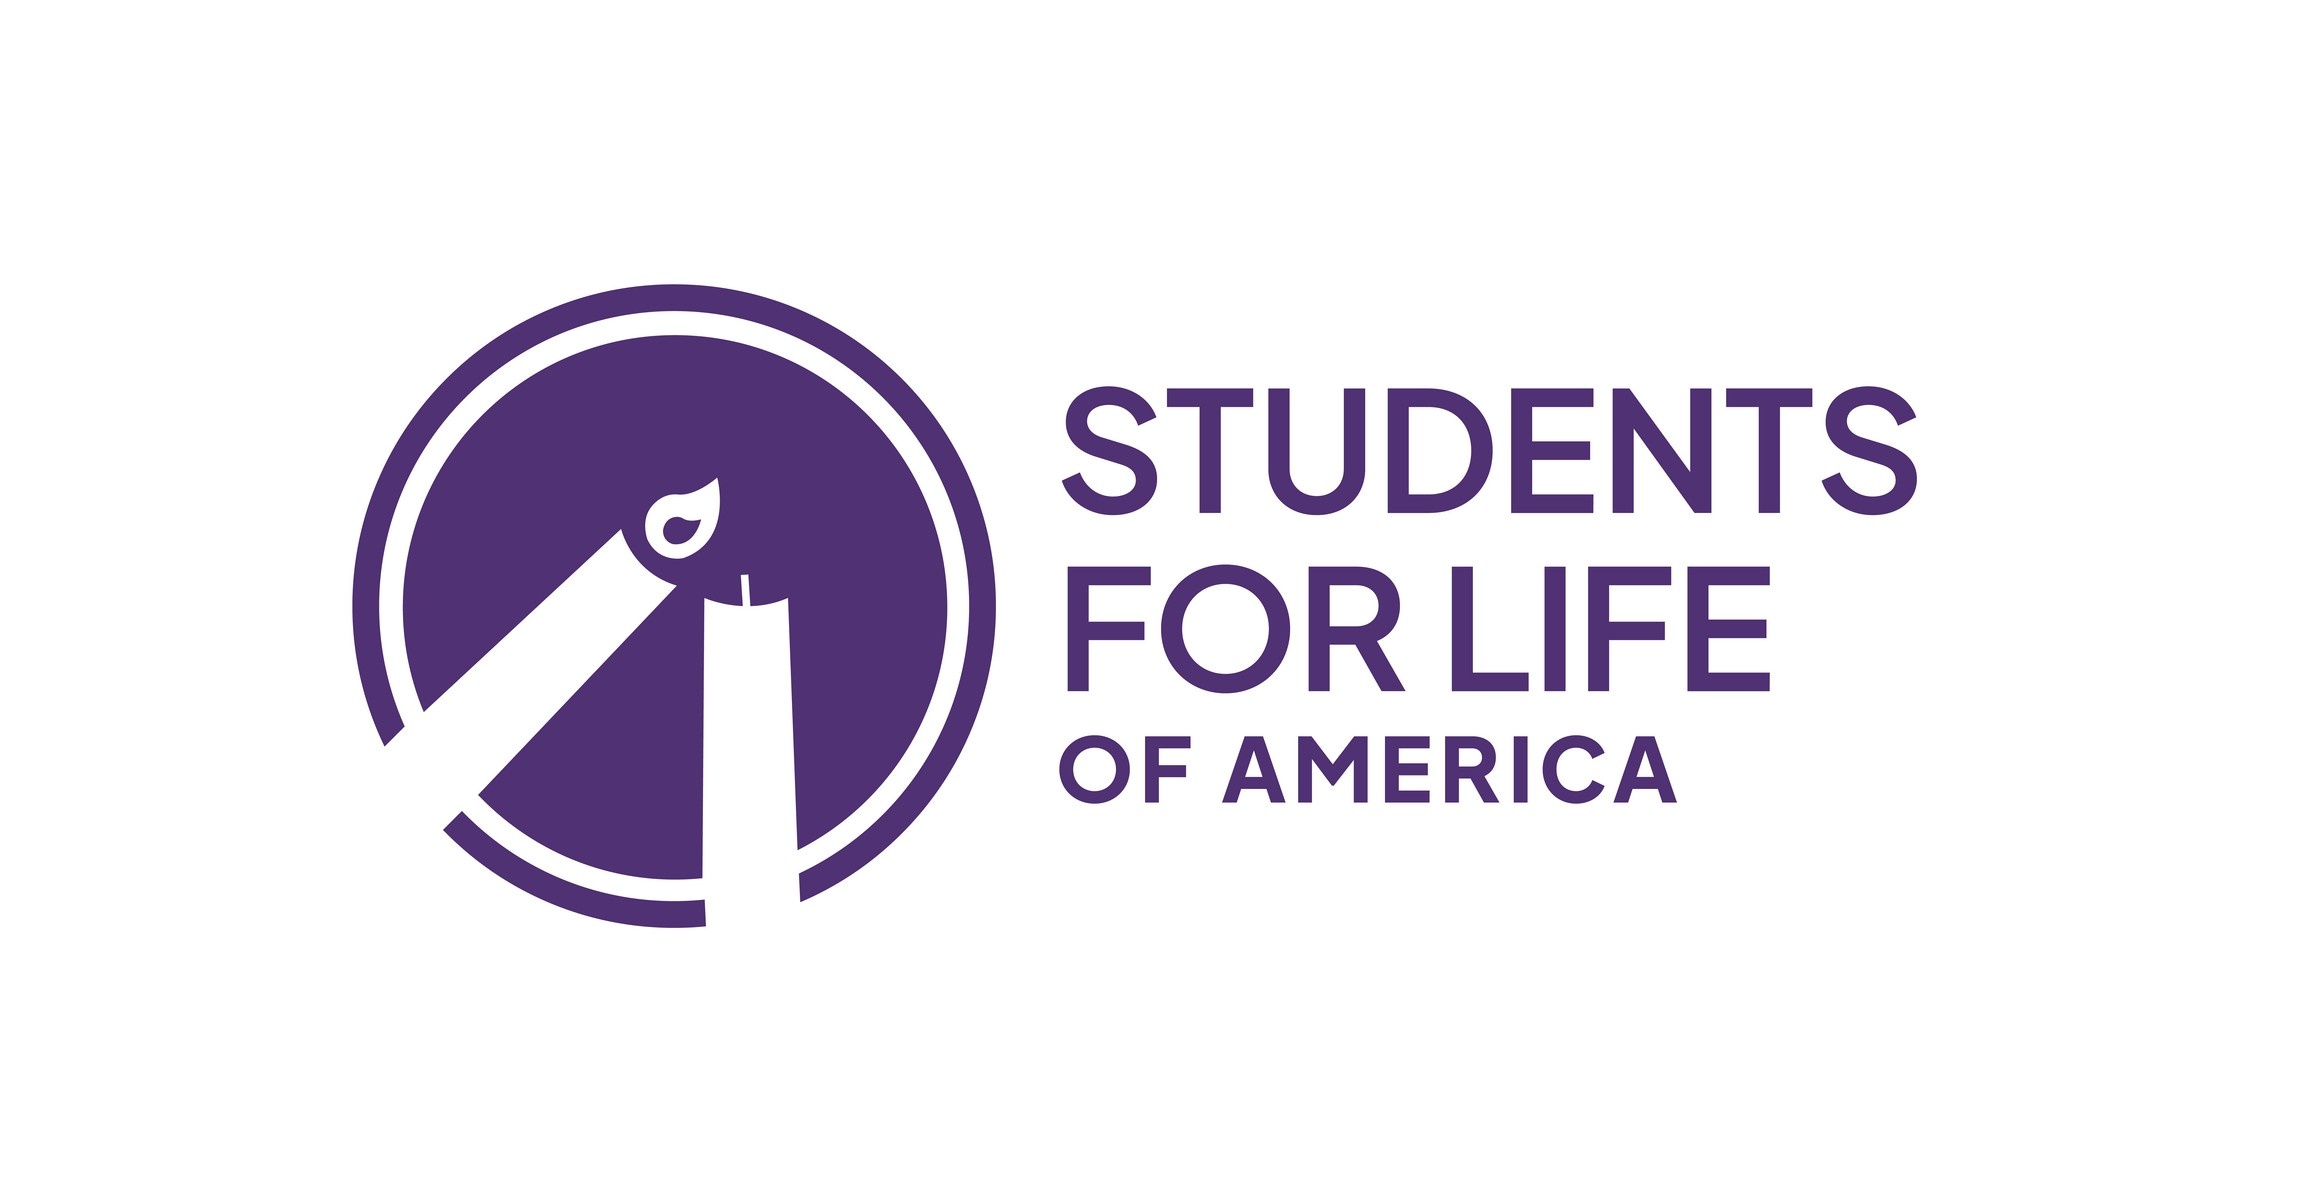 Students for life logo